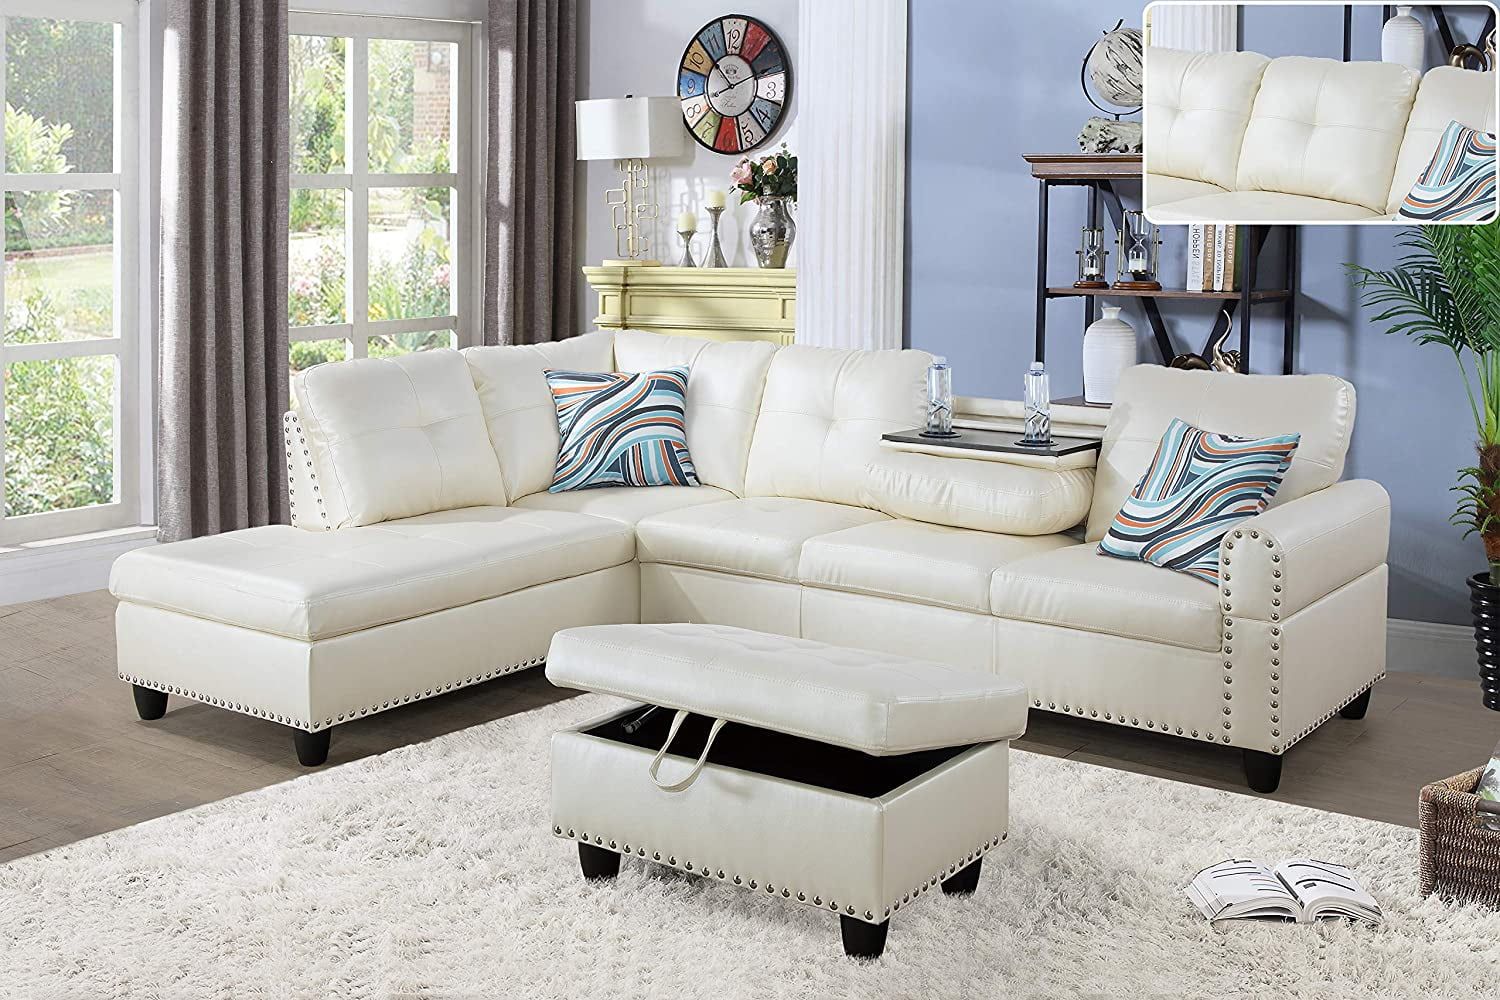 Ainehome Faux Leather Sectional Sofa, Living Room Set With Drop Down Table  & Cup Holder – White – Walmart Pertaining To Faux Leather Sectional Sofa Sets (Photo 15 of 15)